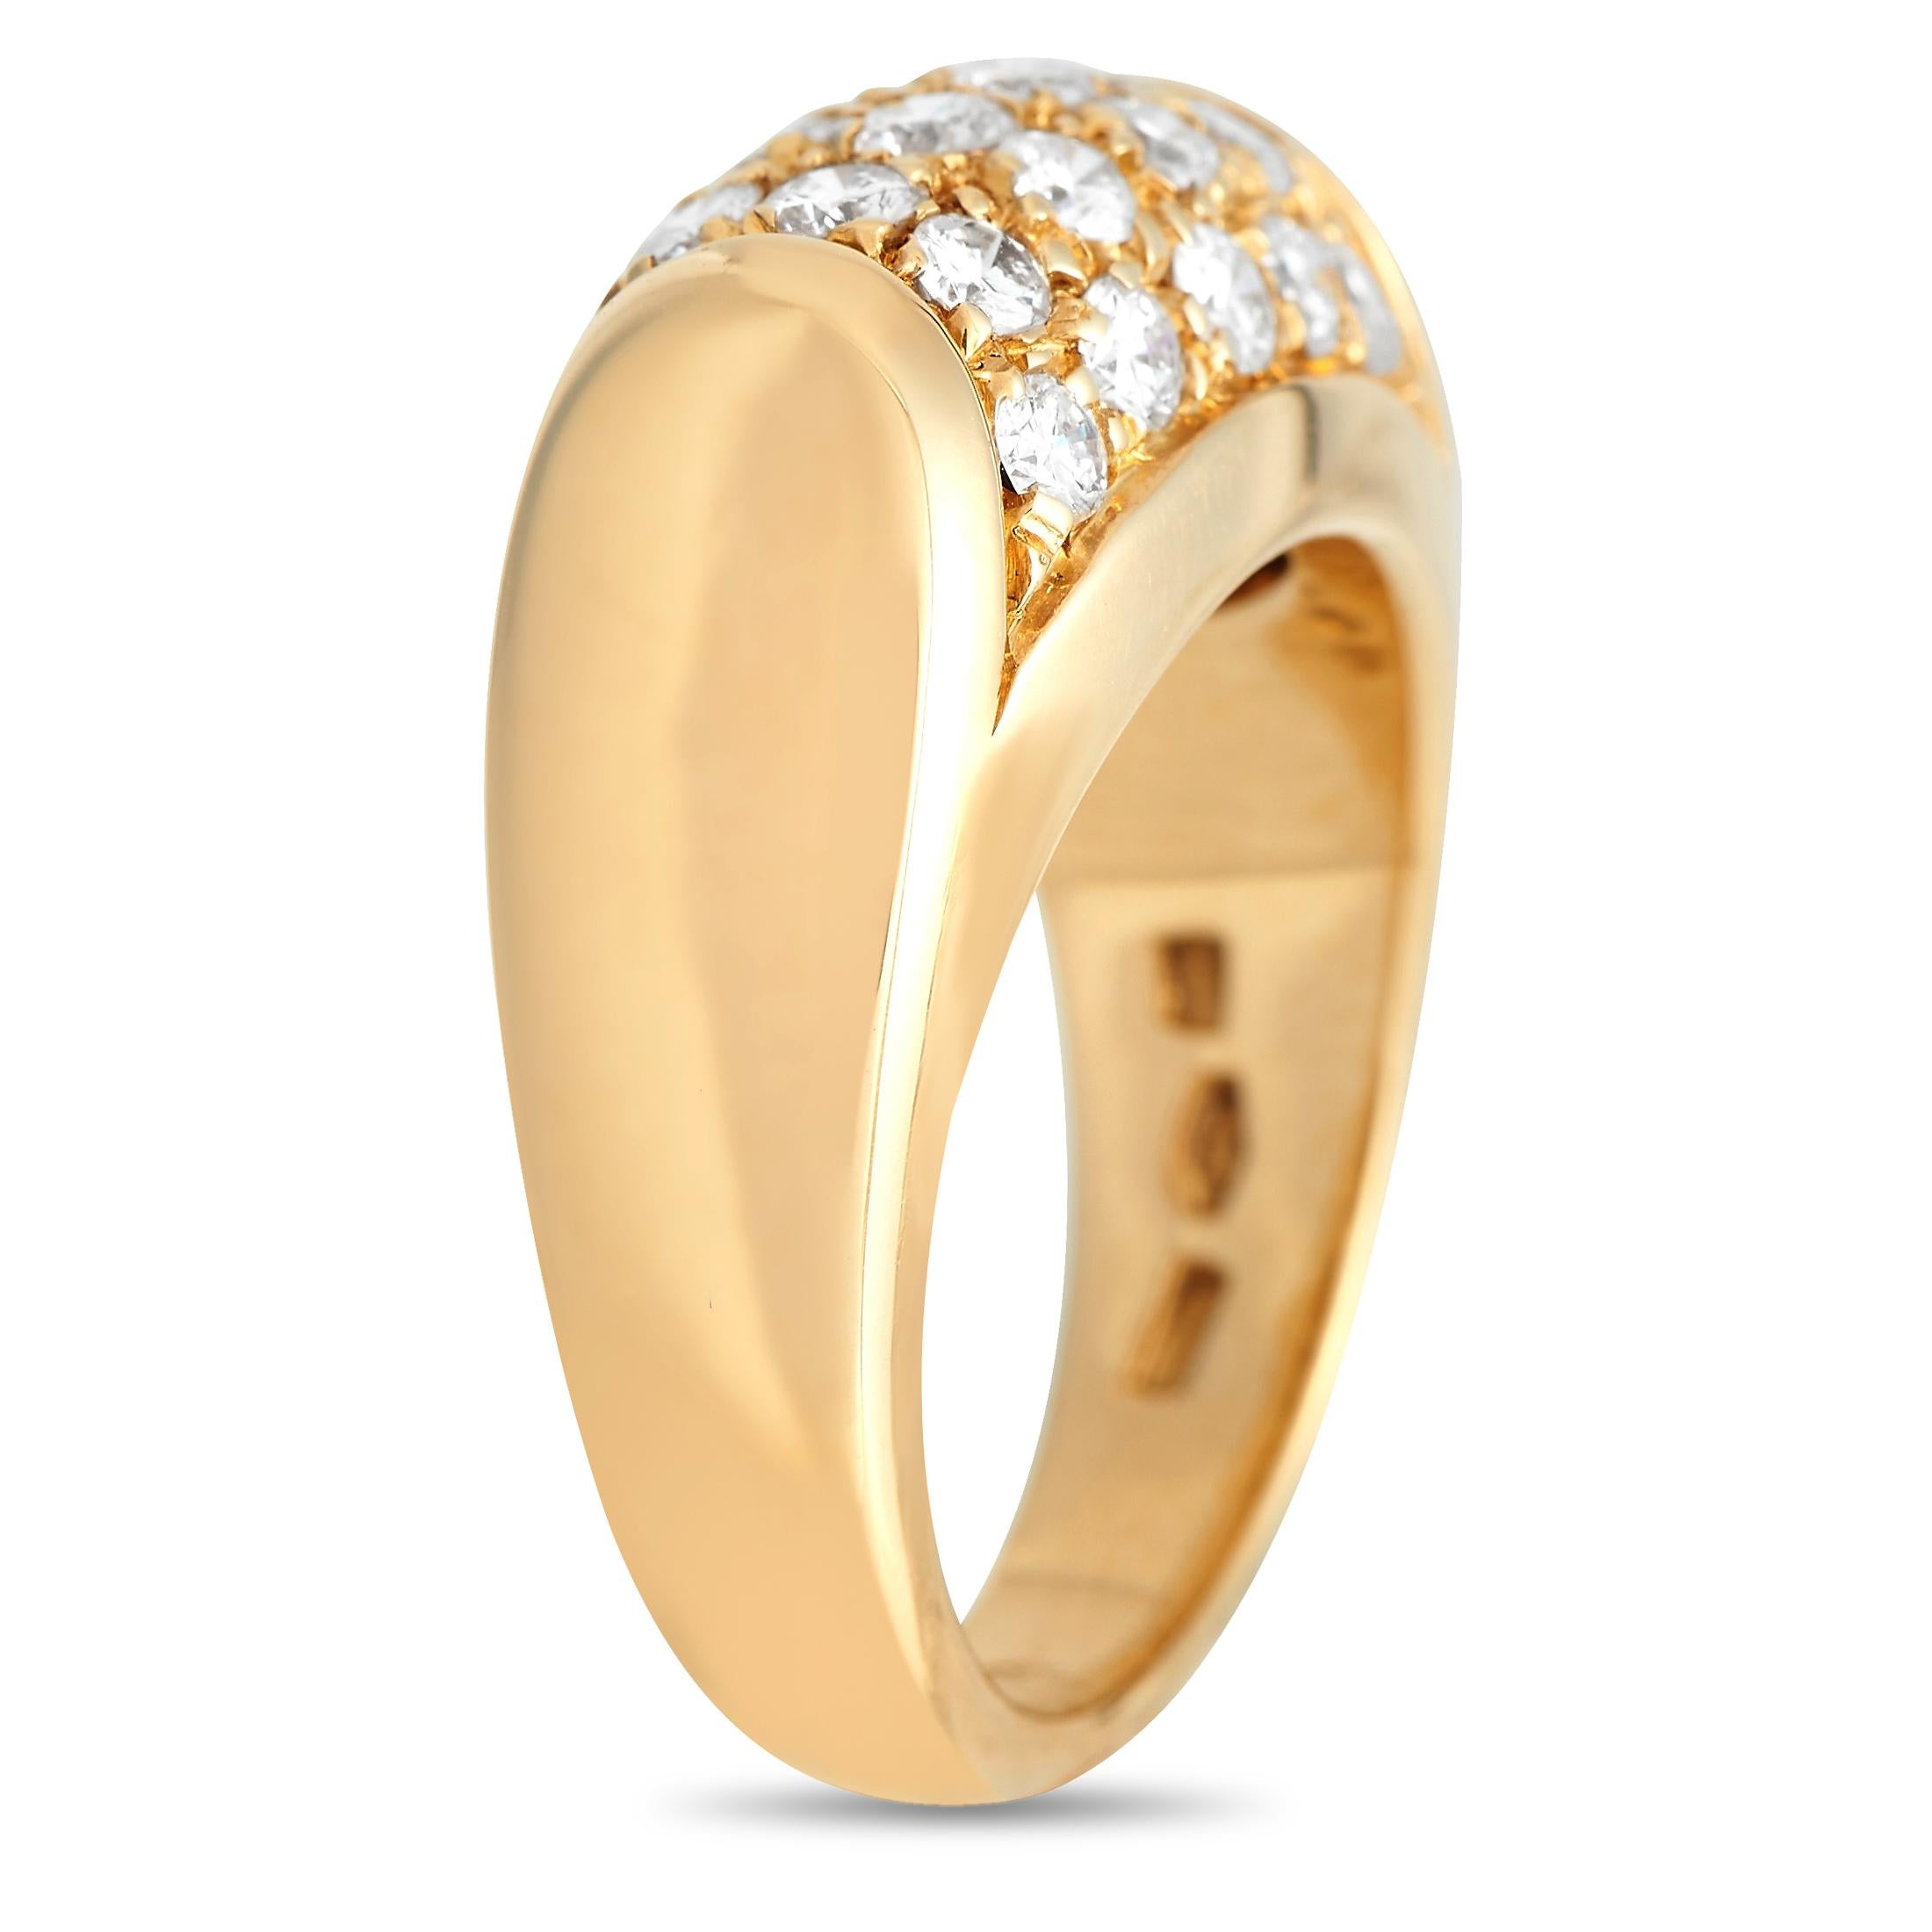 Shape, style, and sophistication all come in unison to form this exceptional piece of jewelry. The Bvlgari Tronchetto ring bears a tree trunk silhouette, stout and slightly tapering towards the back. A wide and domed top covered with multiple rows